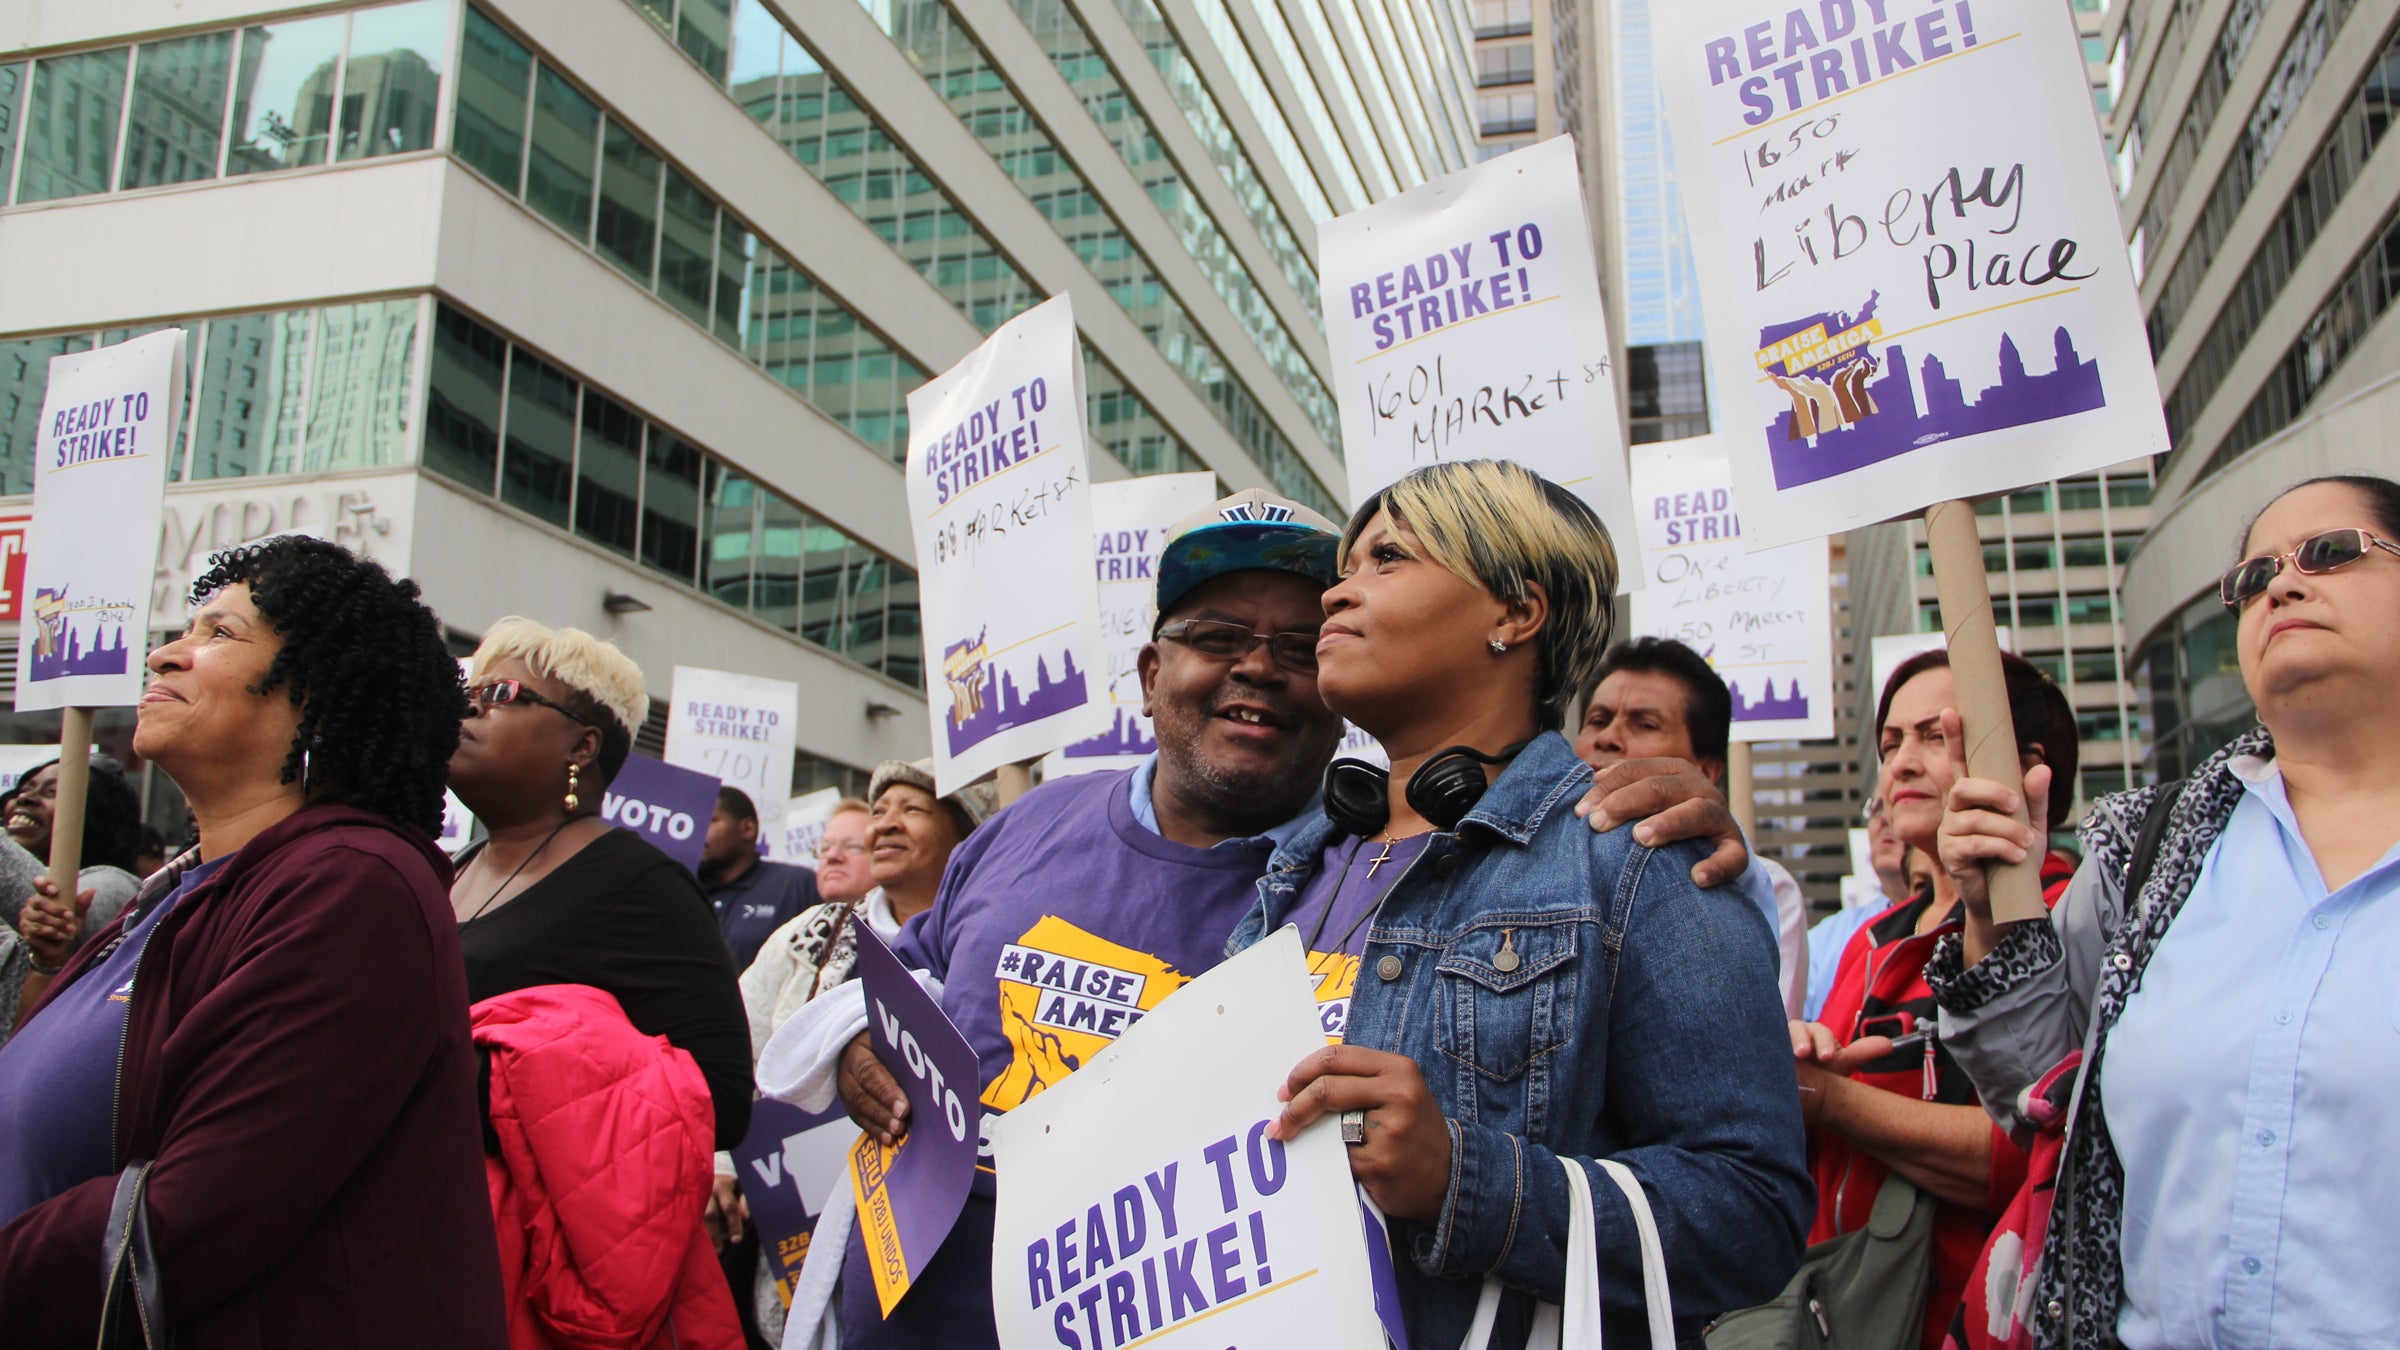  Commercial building cleaners rally near City Hall Tuesday. (Emma Lee/WHYY) 